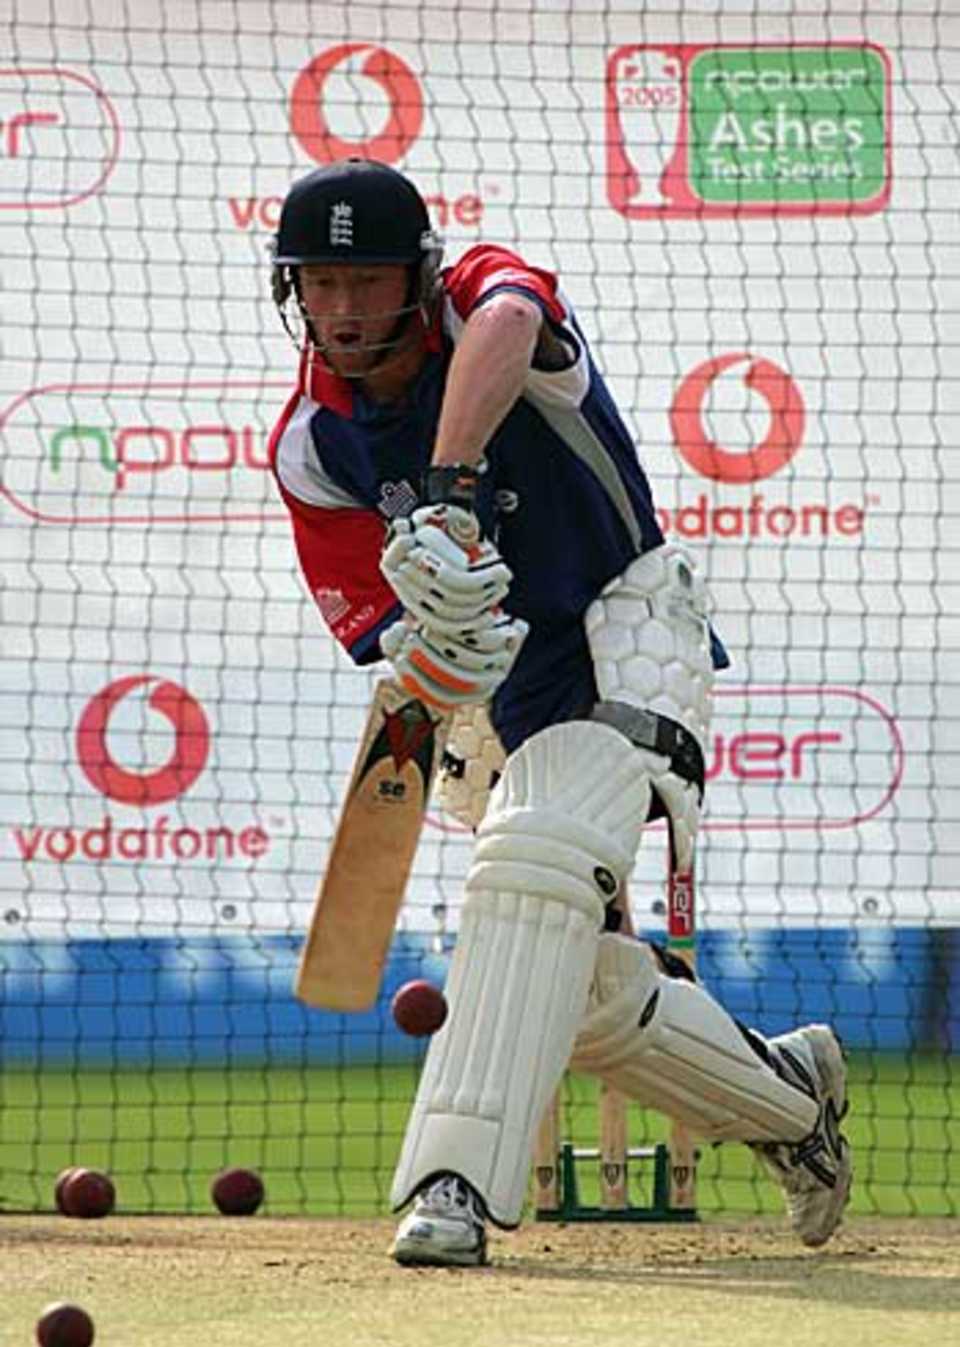 Paul Collingwood works in the nets during practice and he may start his first home Test at The Oval, September 7, 2005